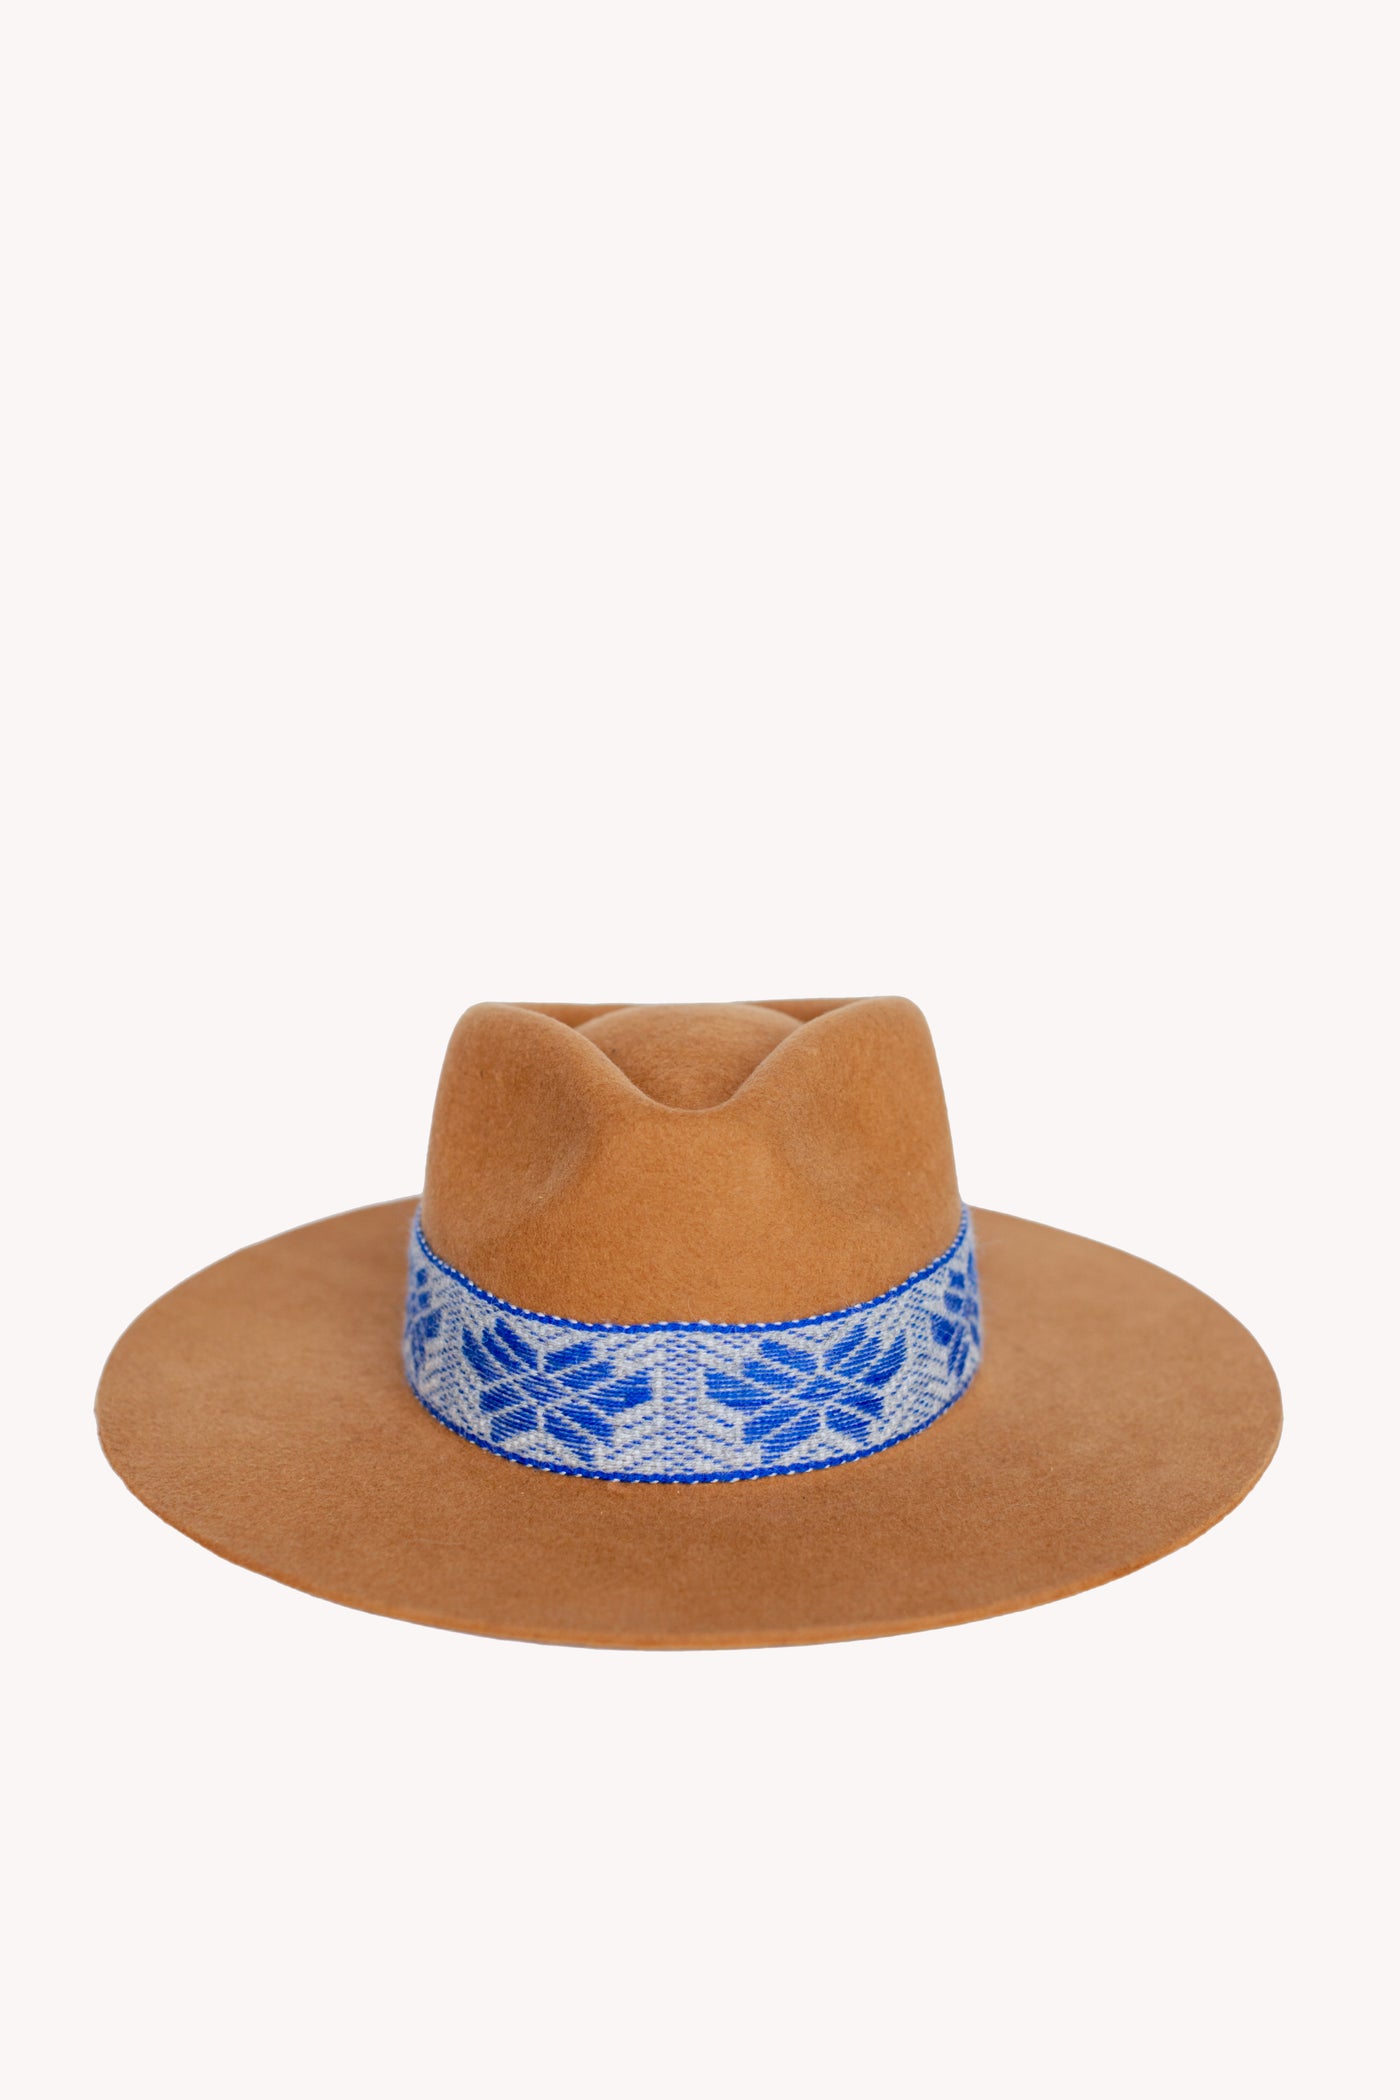 Camel Western Hat with Resilience Intention Band  Removable Intention Hat Textile Band